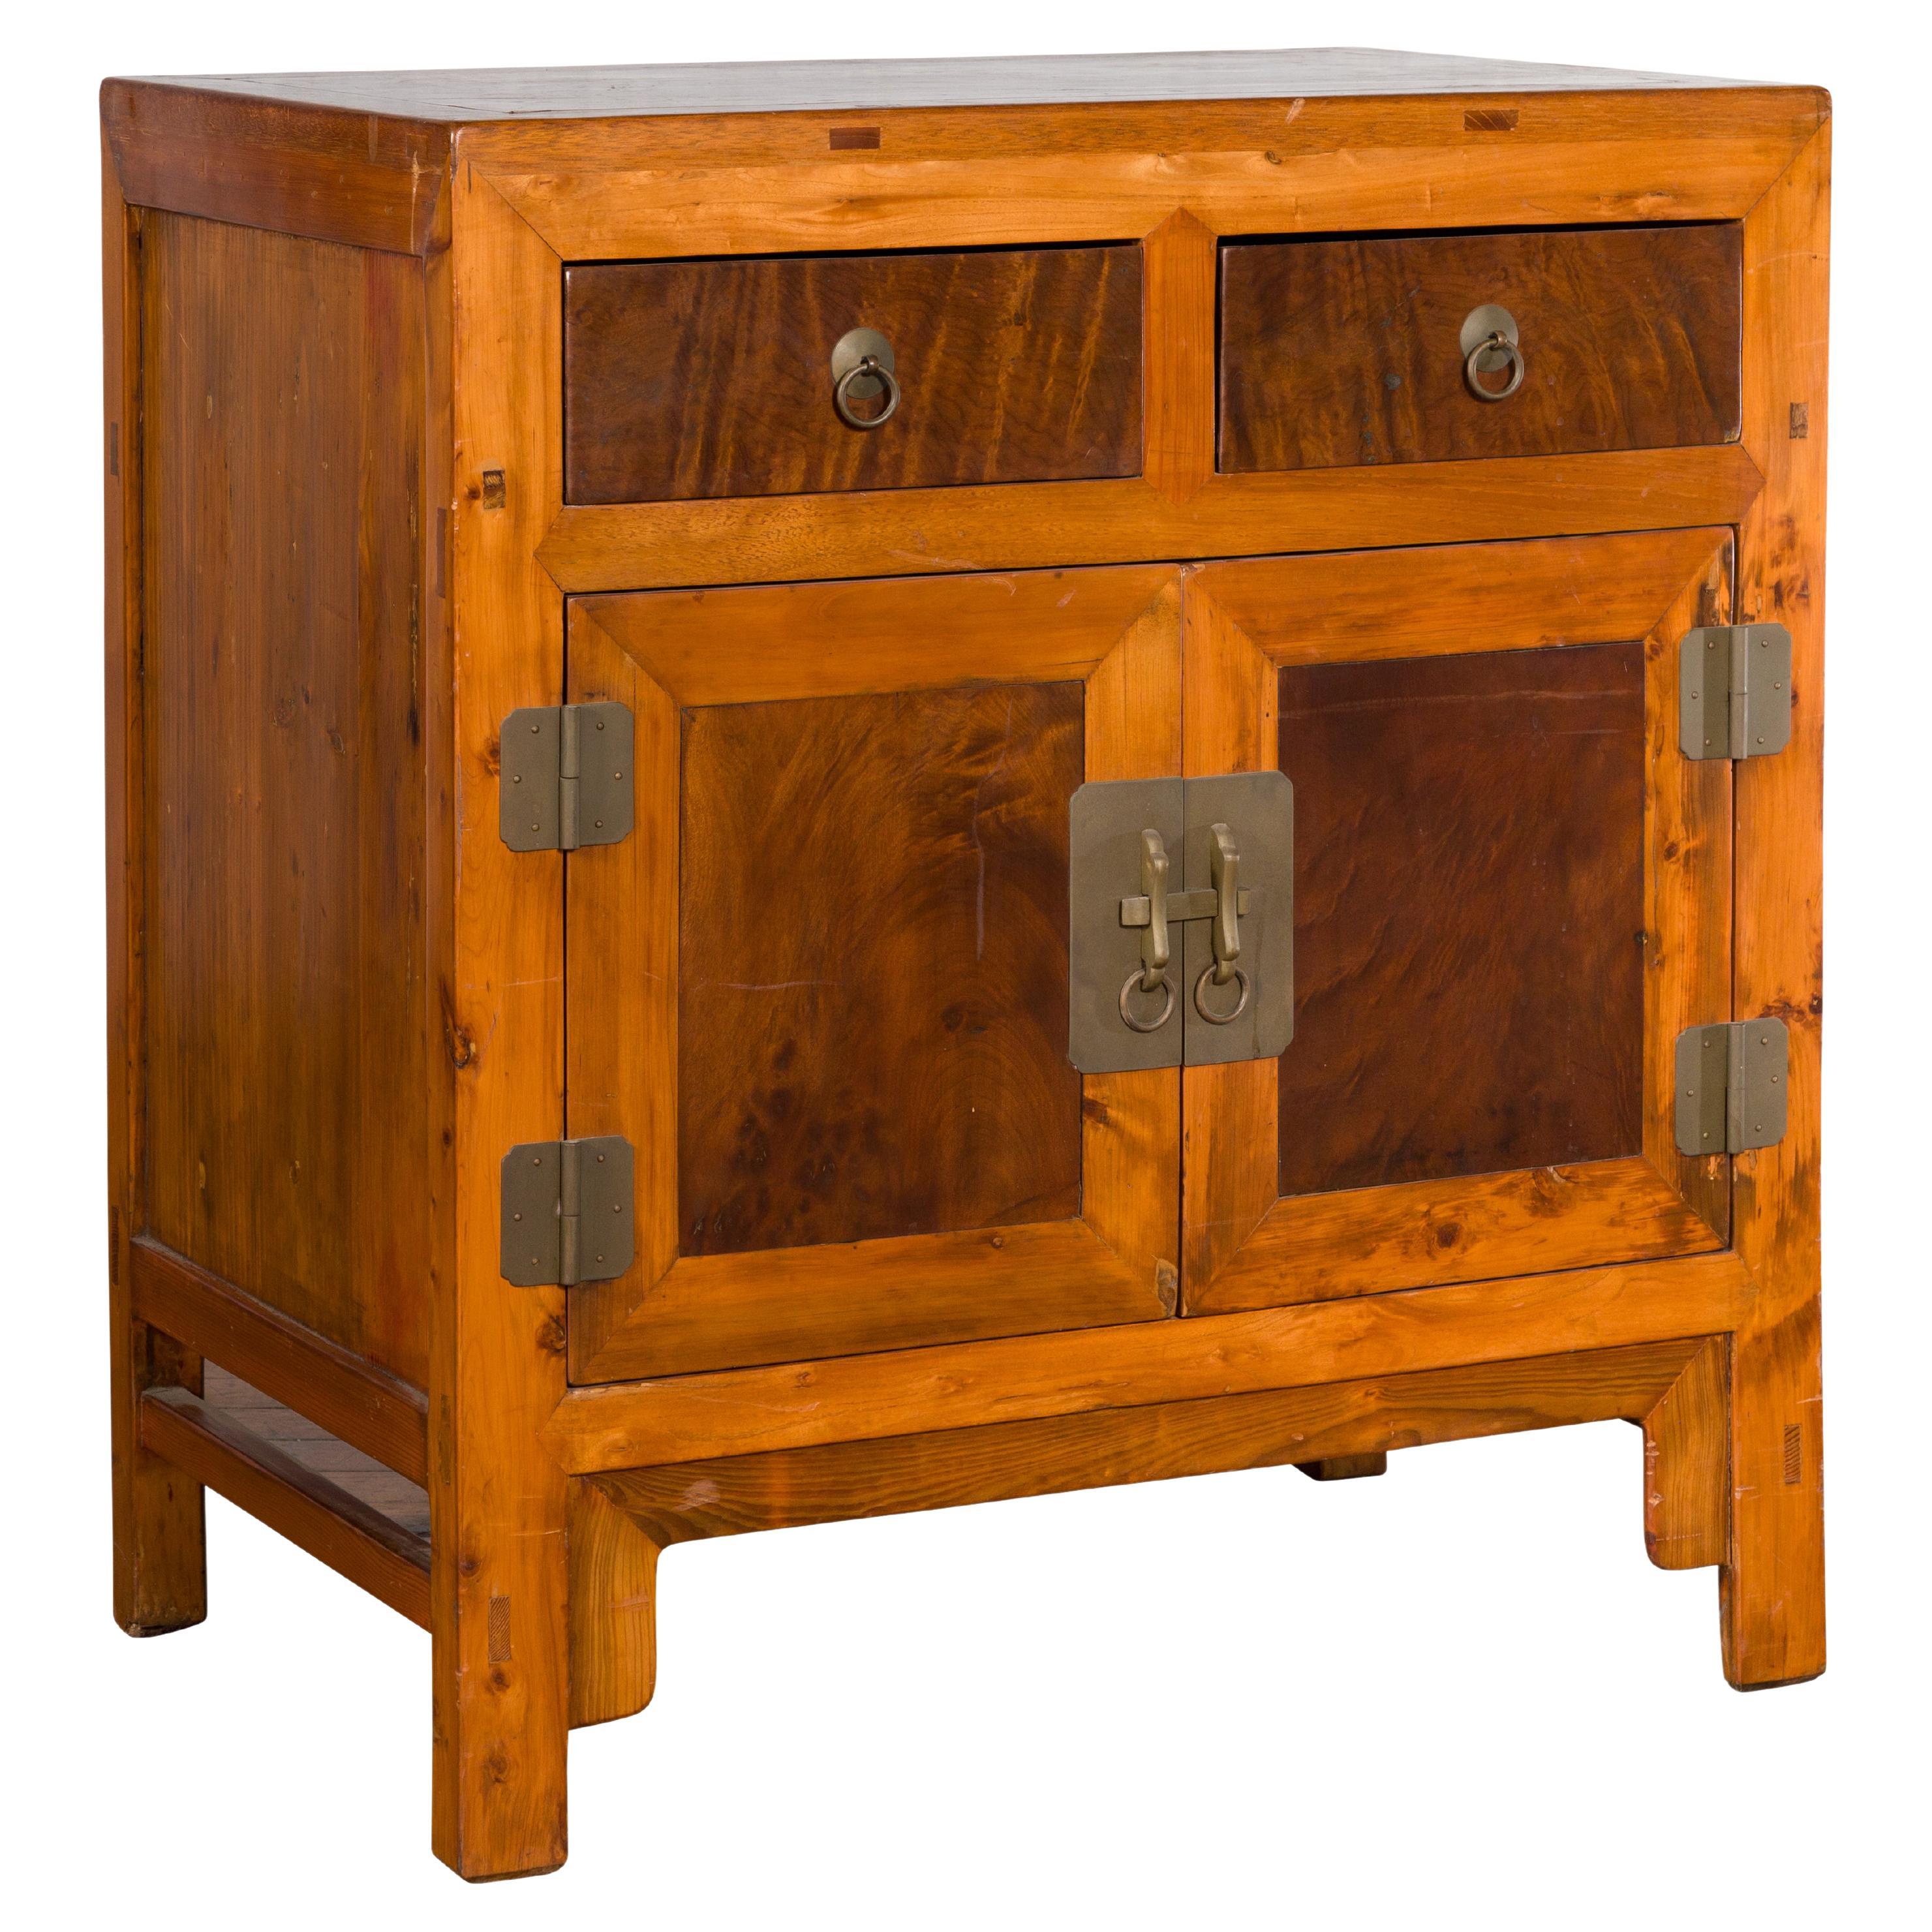 Chinese Antique Elm and Burlwood Two-Toned Side Cabinet with Doors and Drawers